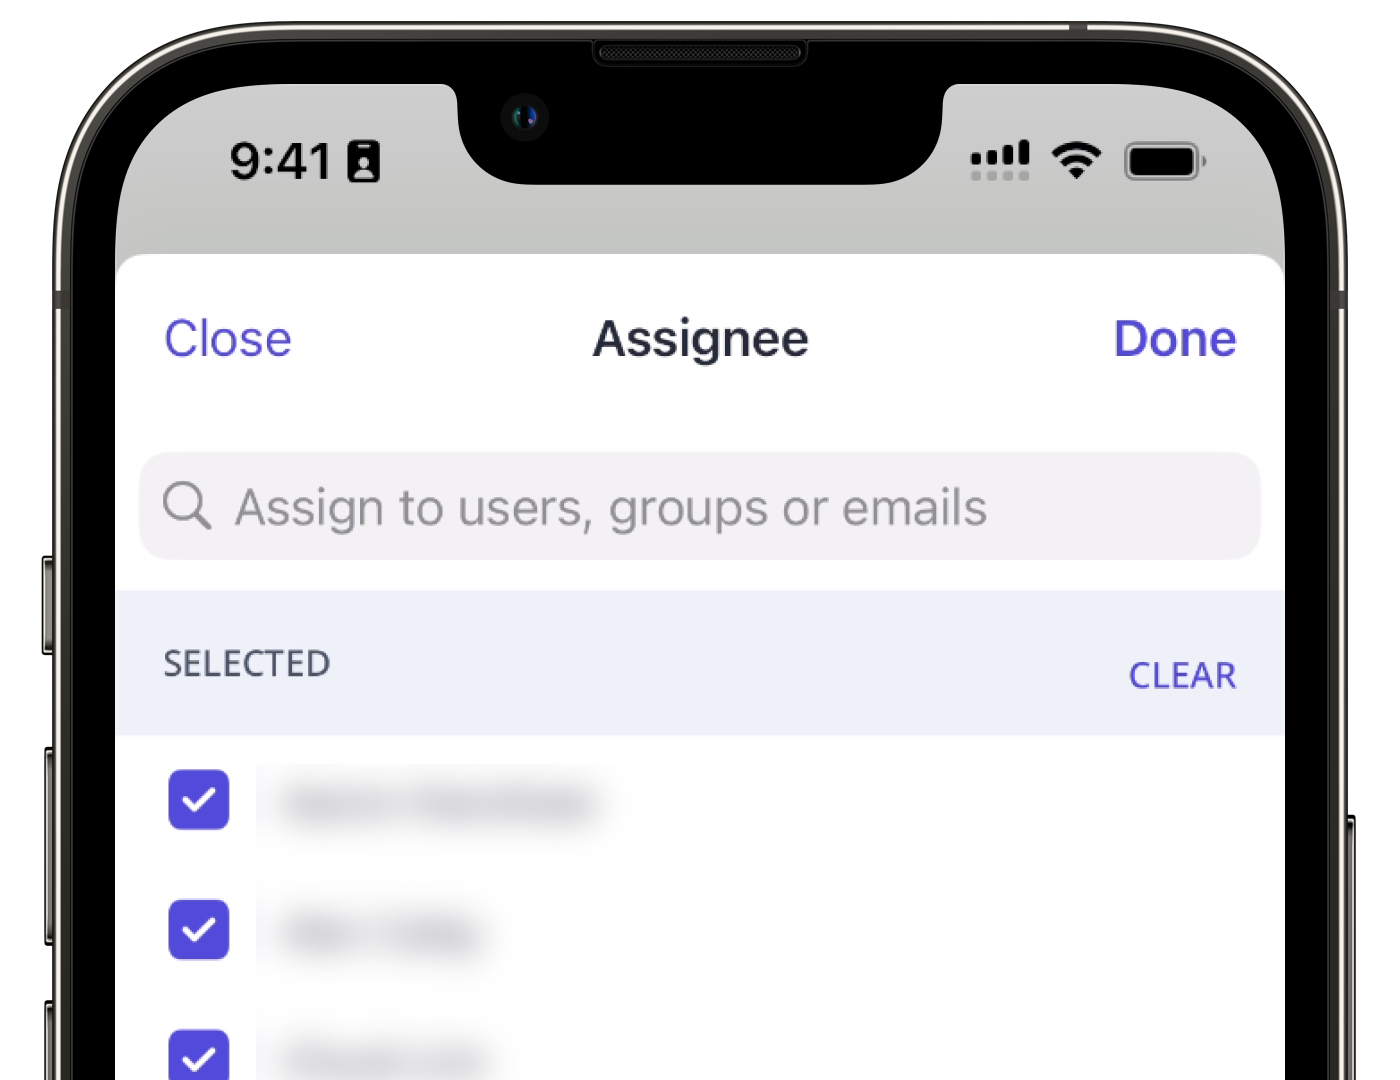 Assign an action to assignees via the mobile app.